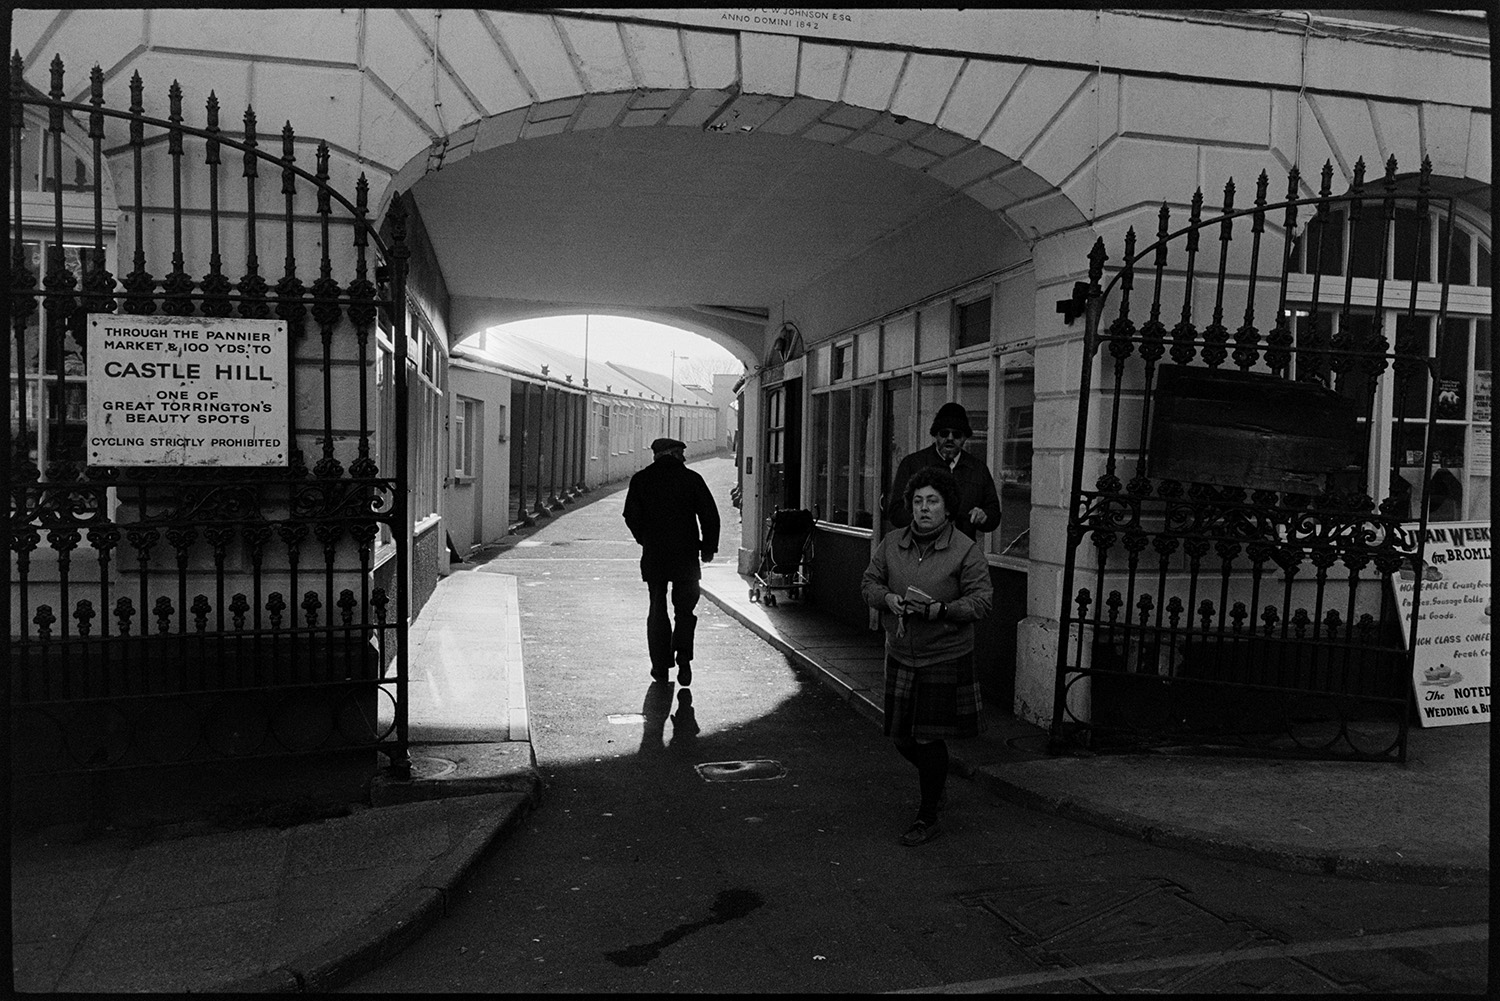 Street scenes with decaying front of antique shop, market.
[People walking under the archway entrance of Torrington Pannier Market. A sing on the open railings to the market is advertising Castle Hill beauty spot.]